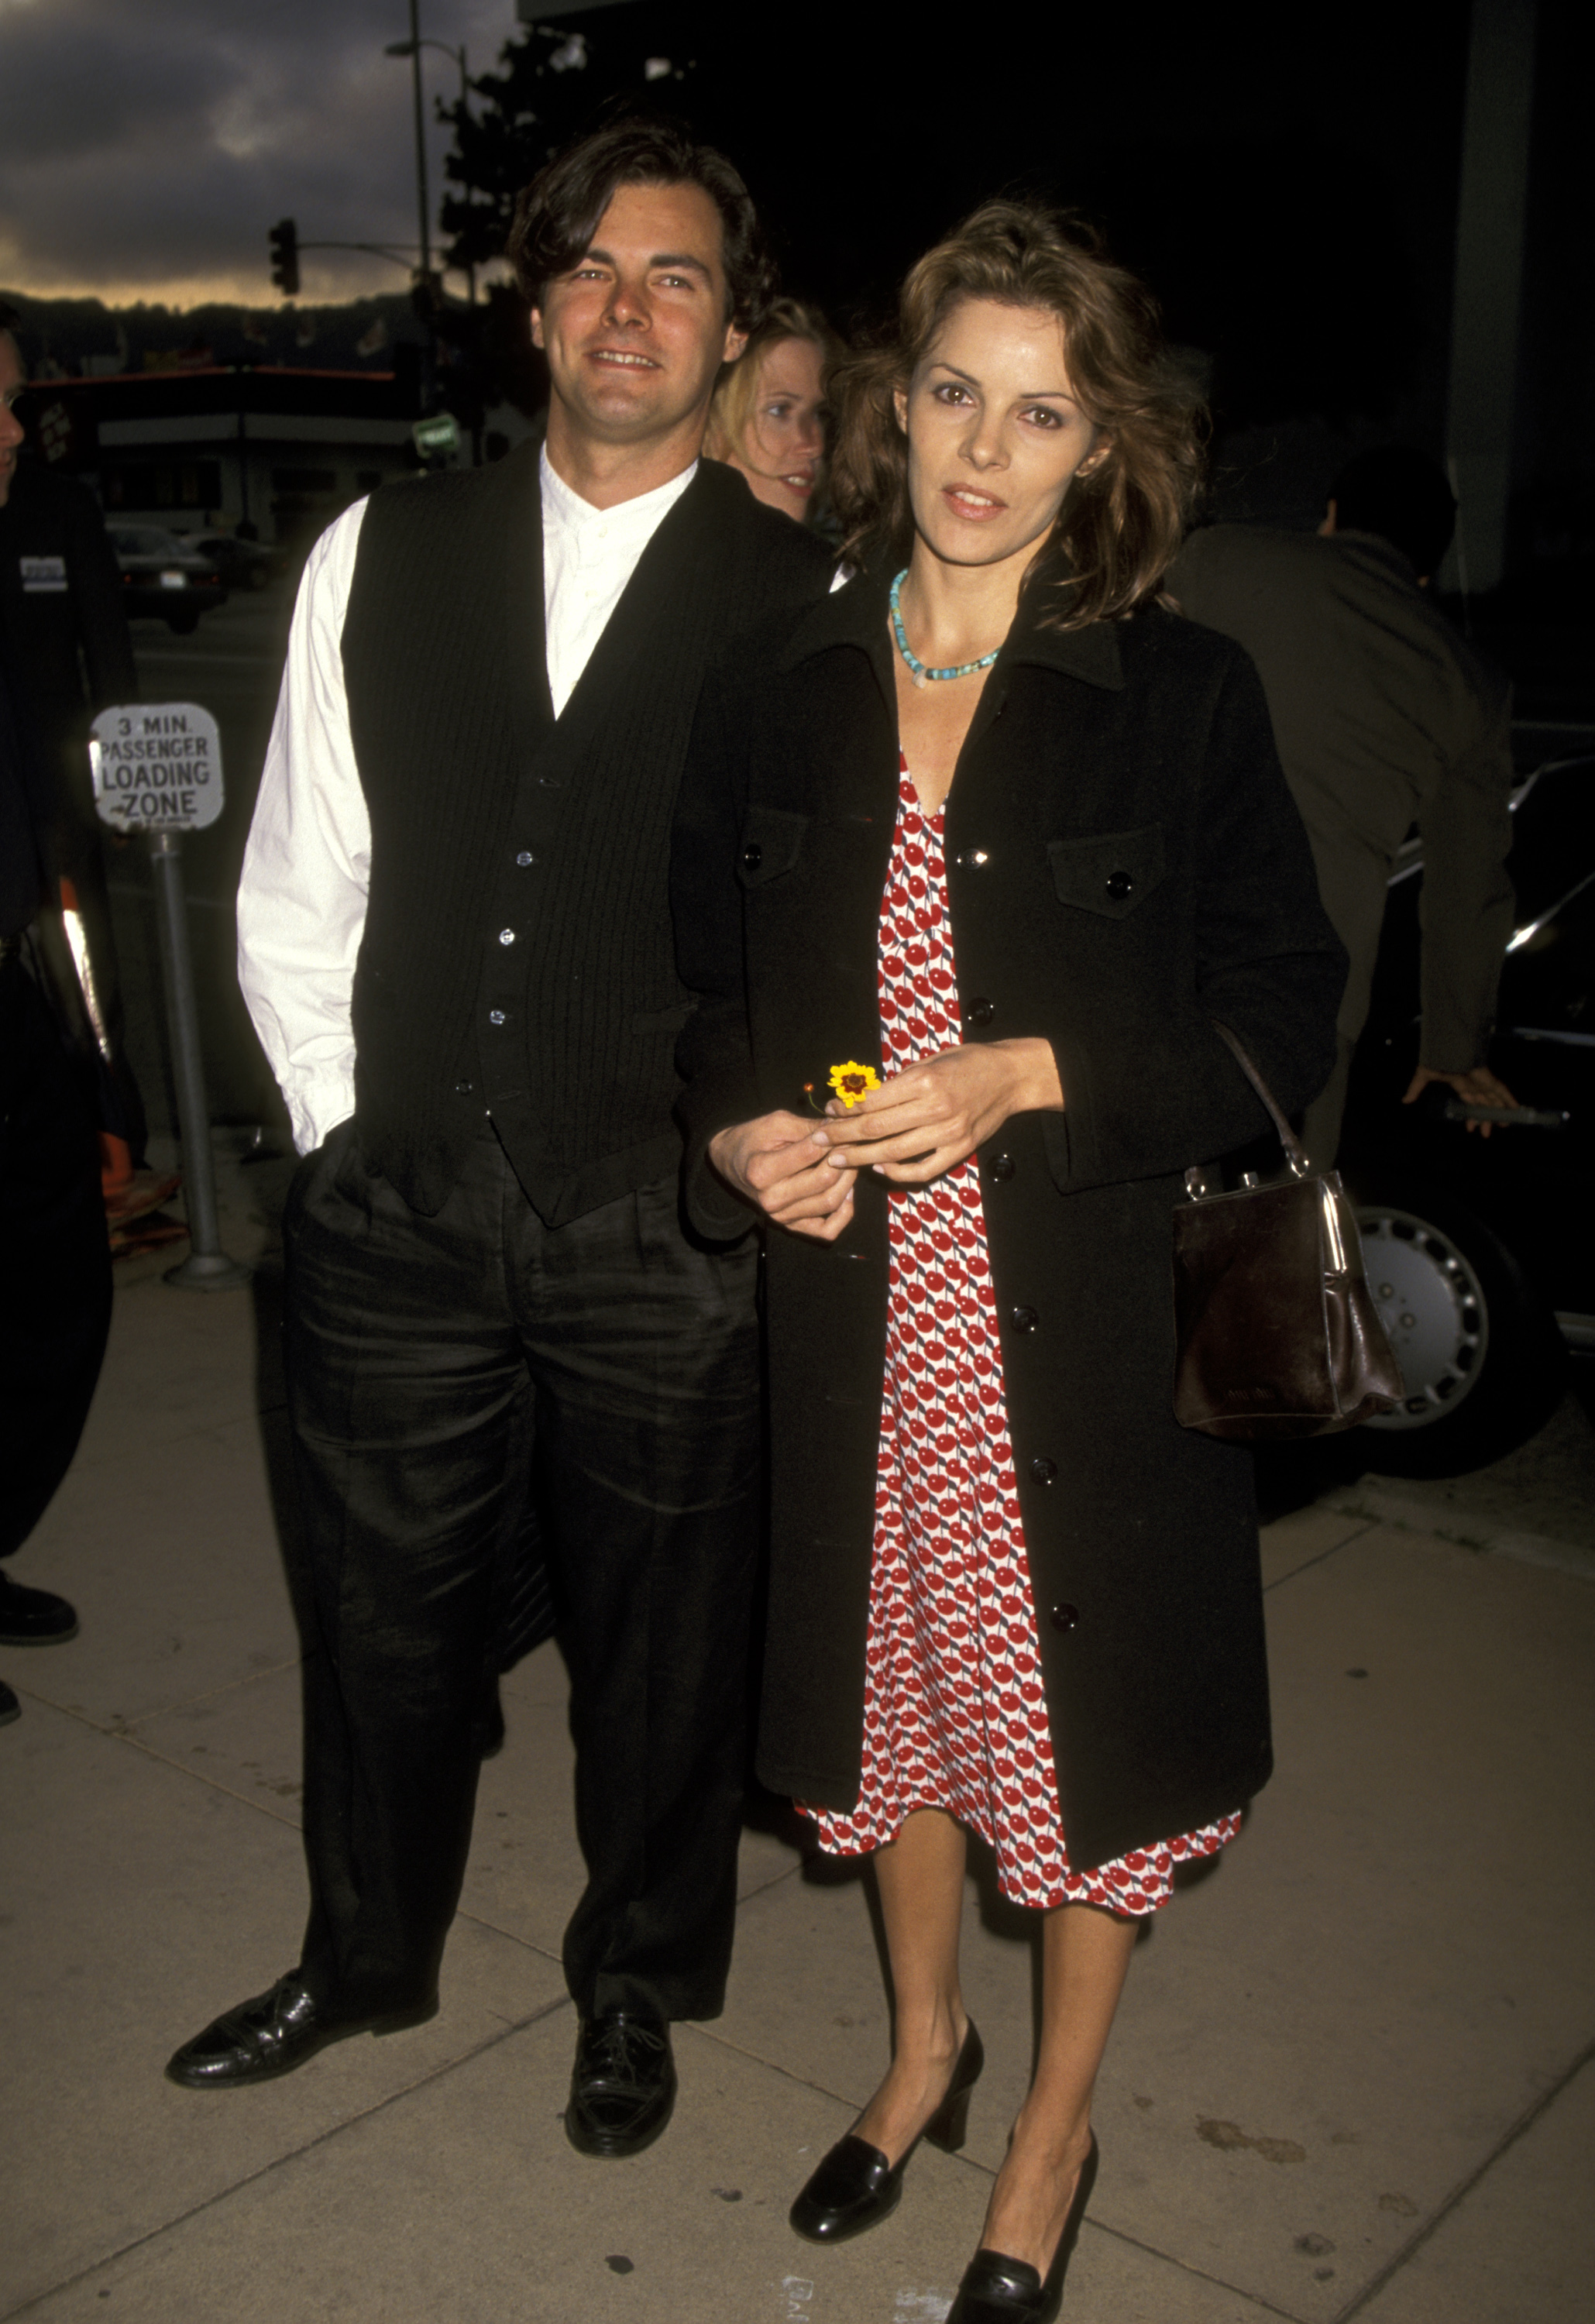 Damon and Tahnee Welch during "I Shot Andy Warhol" premiere in Hollywood, California, on May 16, 1996. | Source: Getty Images